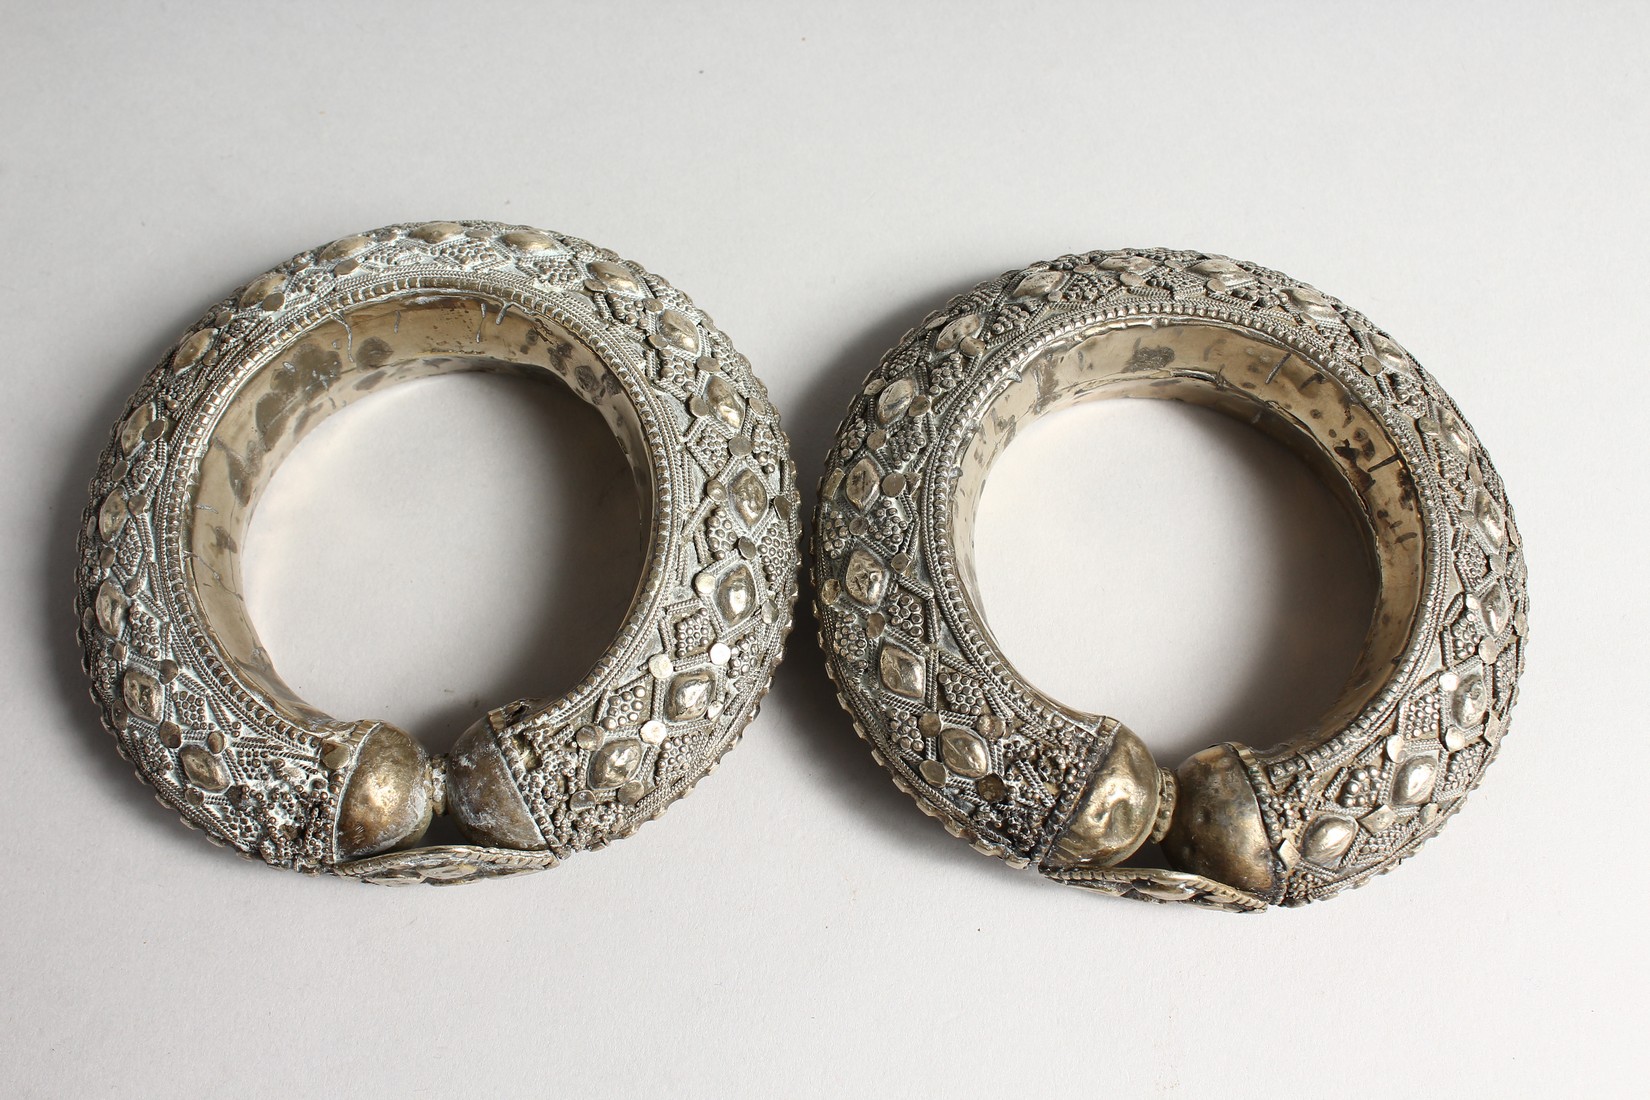 TWO LARGE ISLAMIC SILVER BANGLES - Image 3 of 3